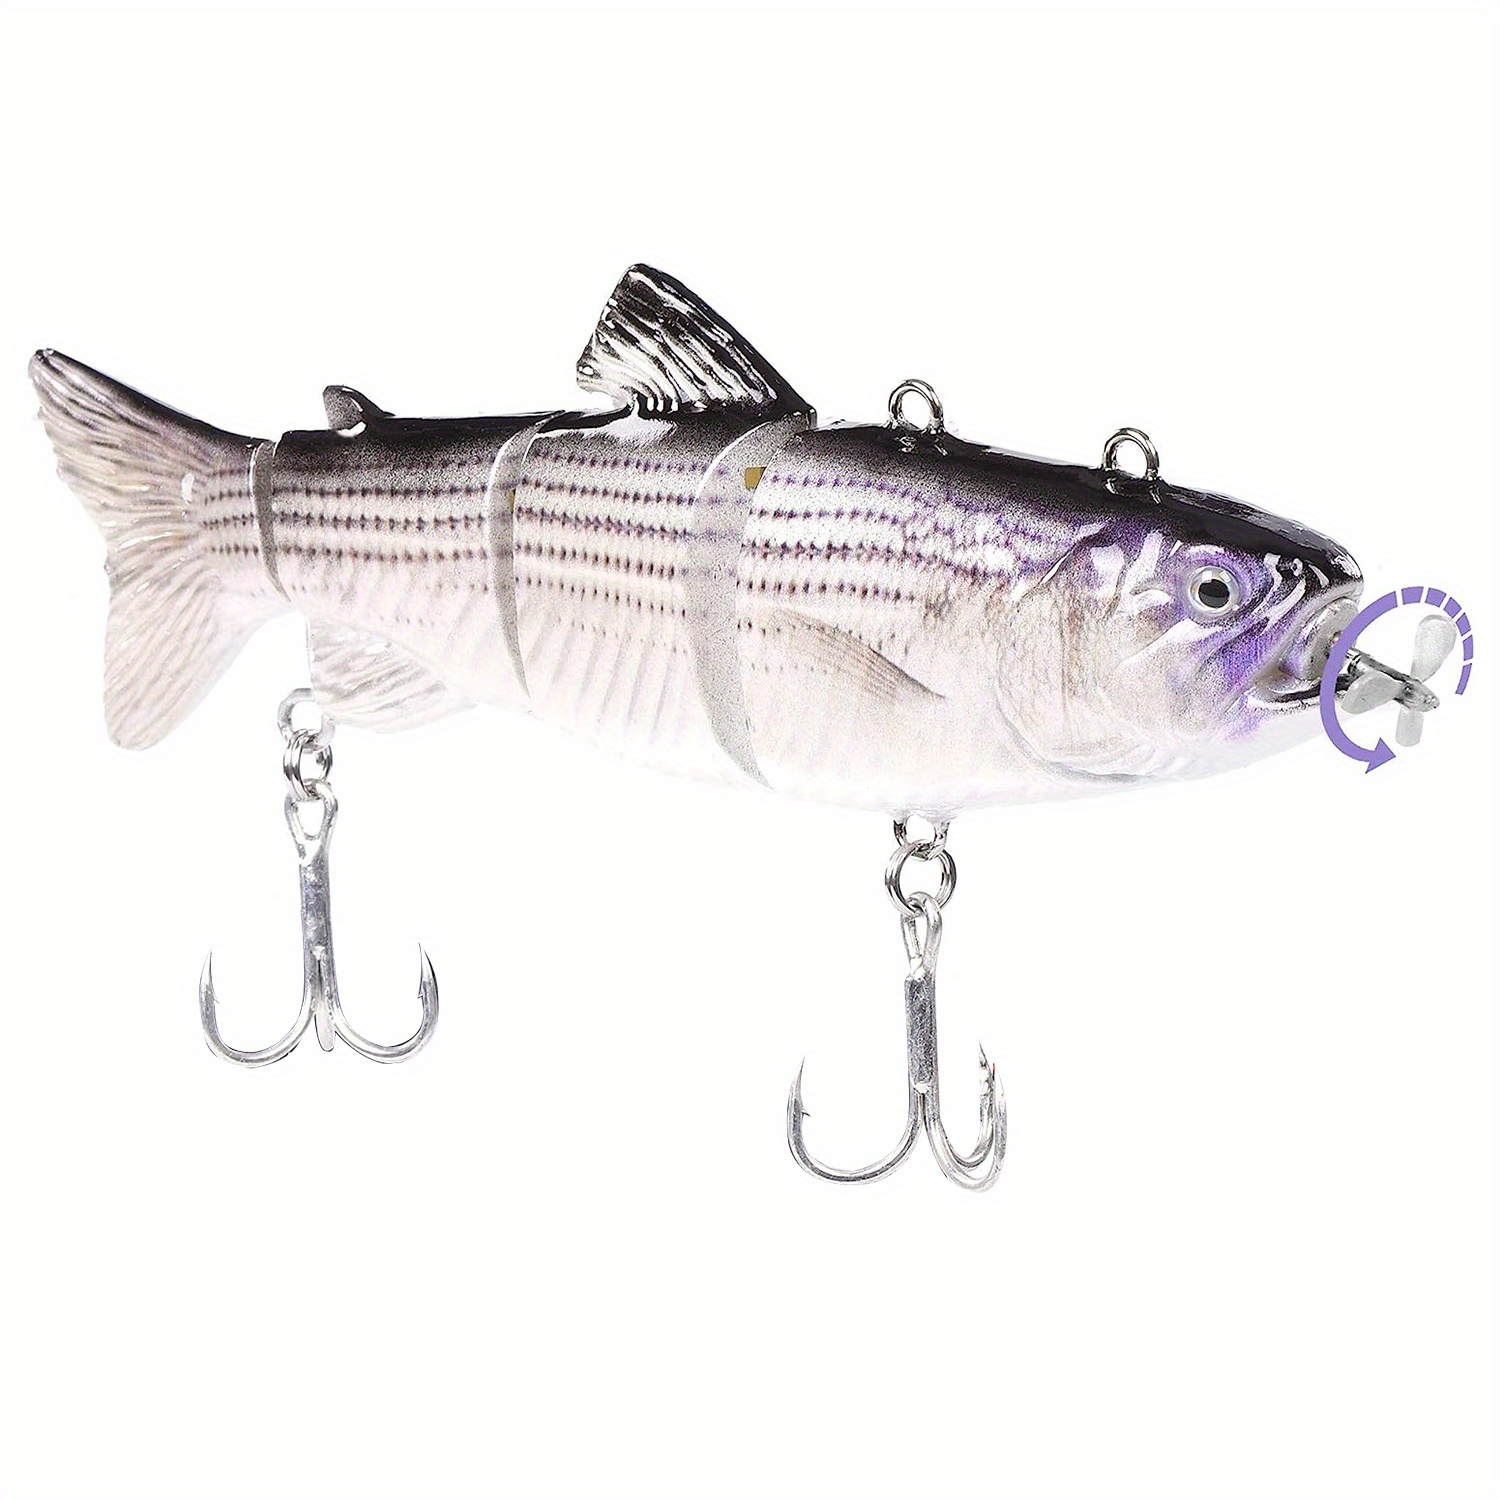  Fishing Lures Electric Lure Swimbait USB Rechargeable